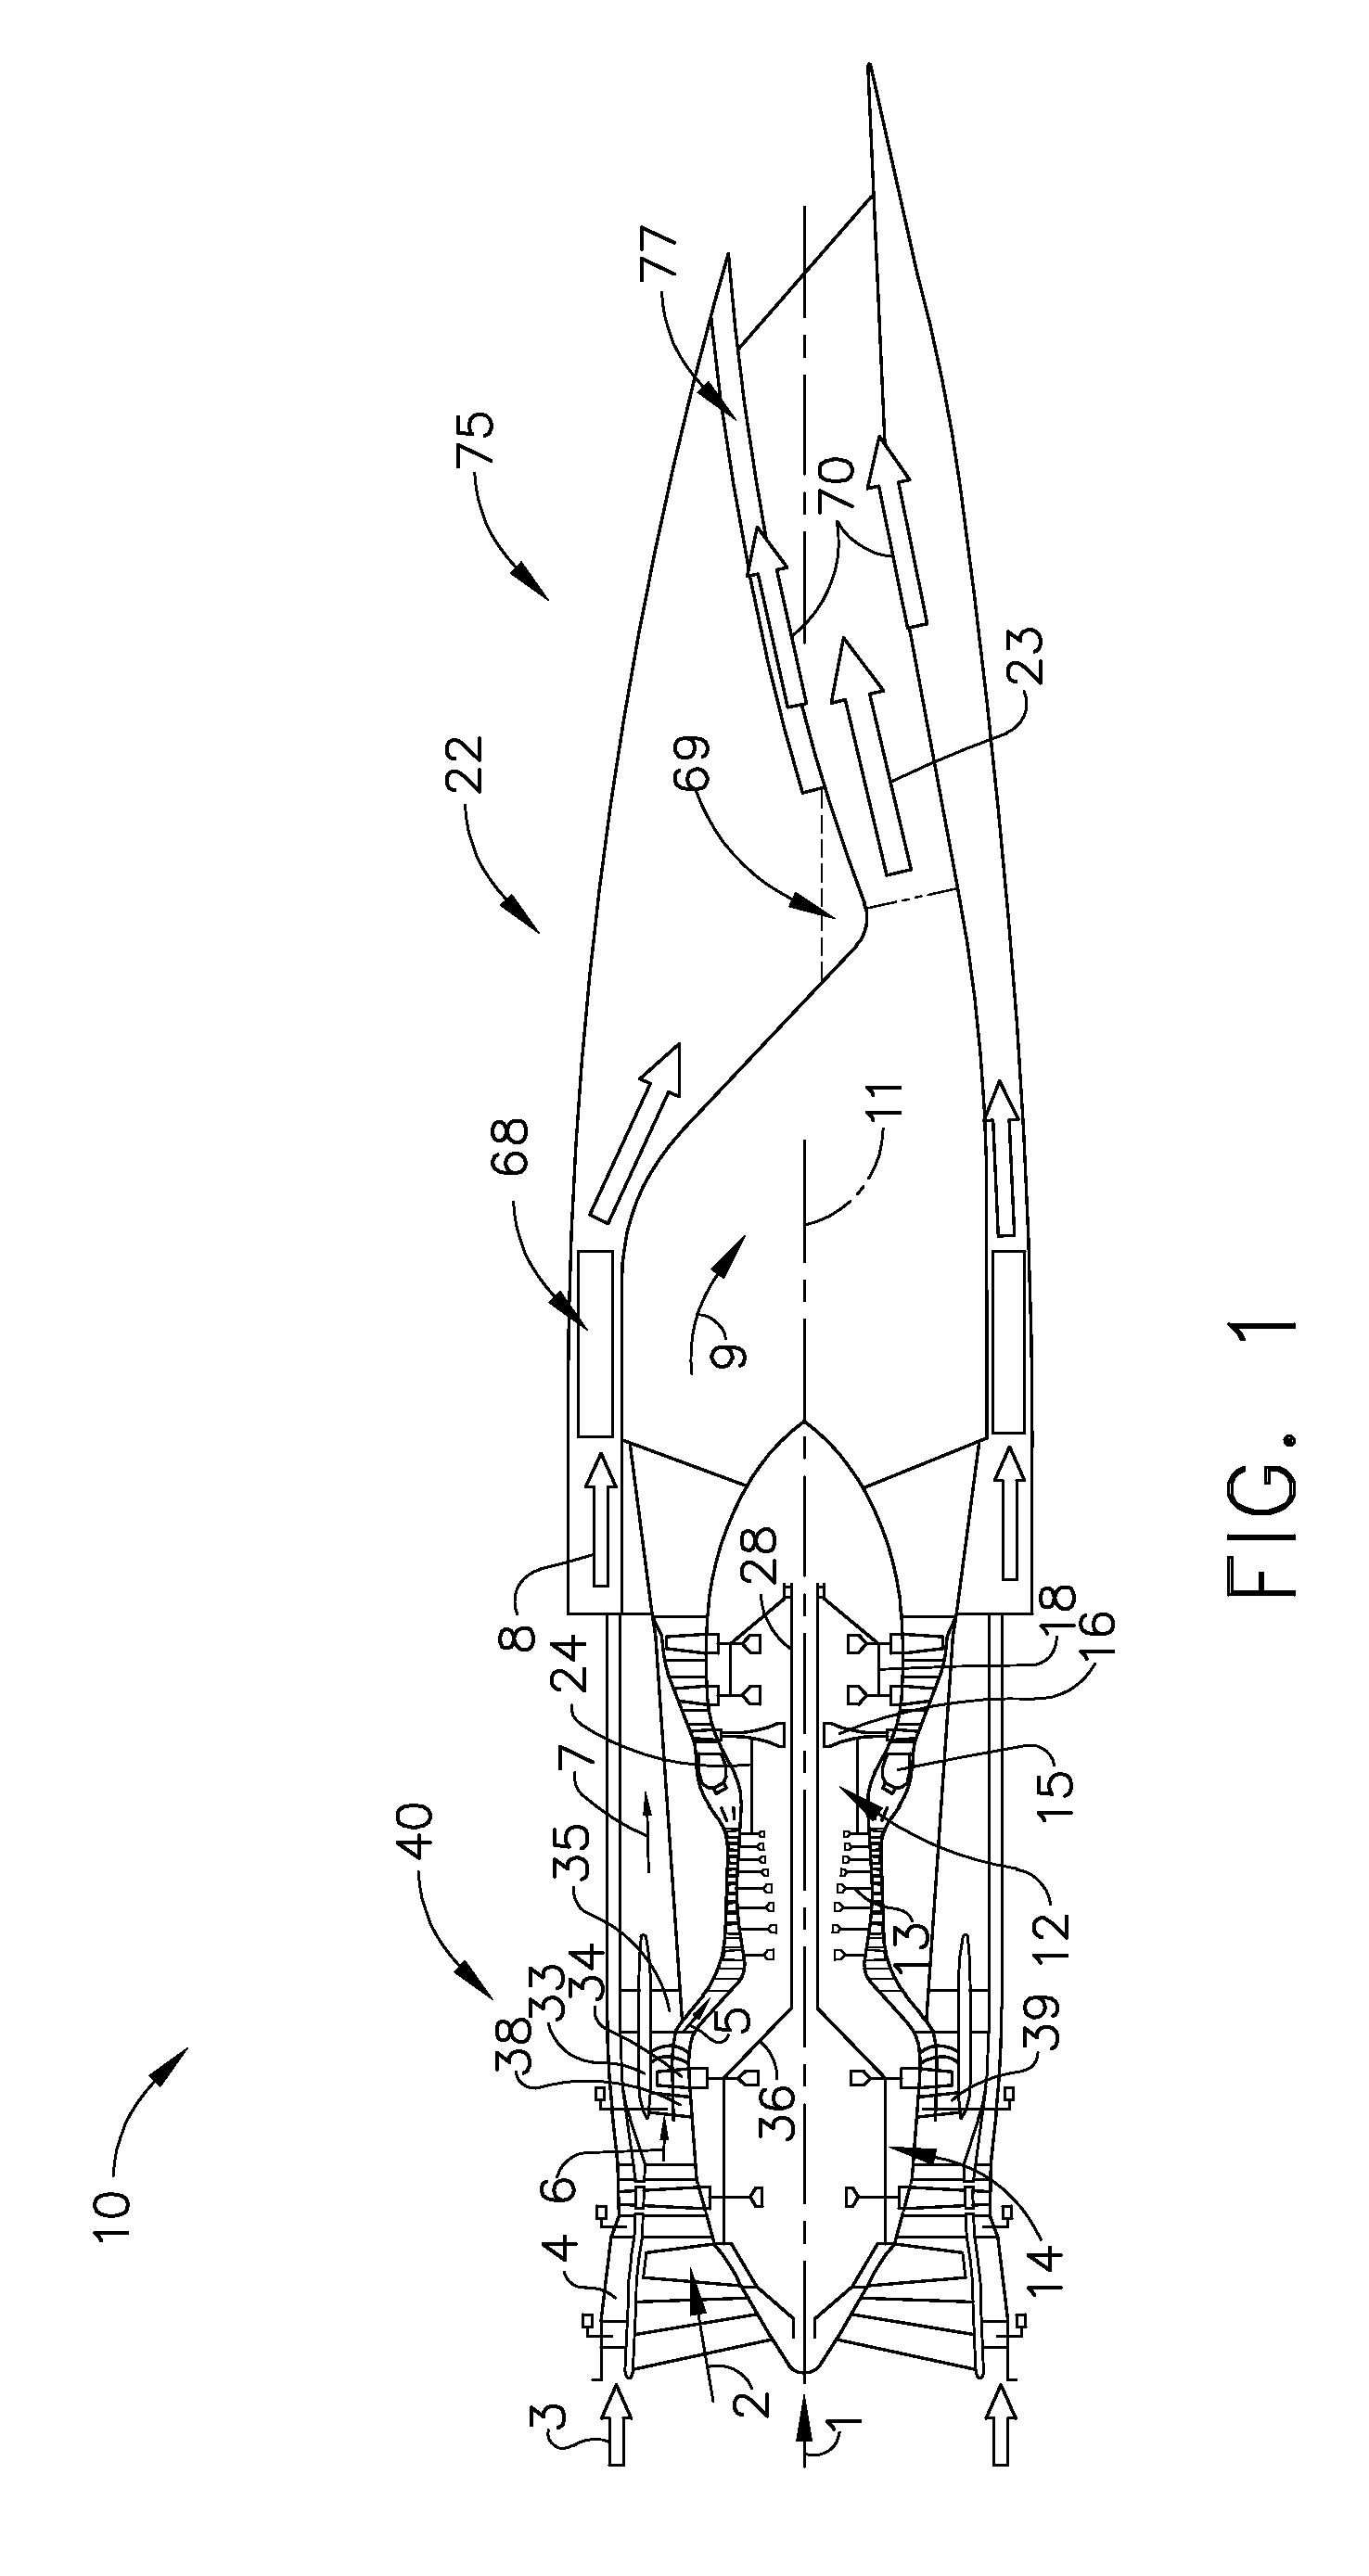 Method of operating a convertible fan engine